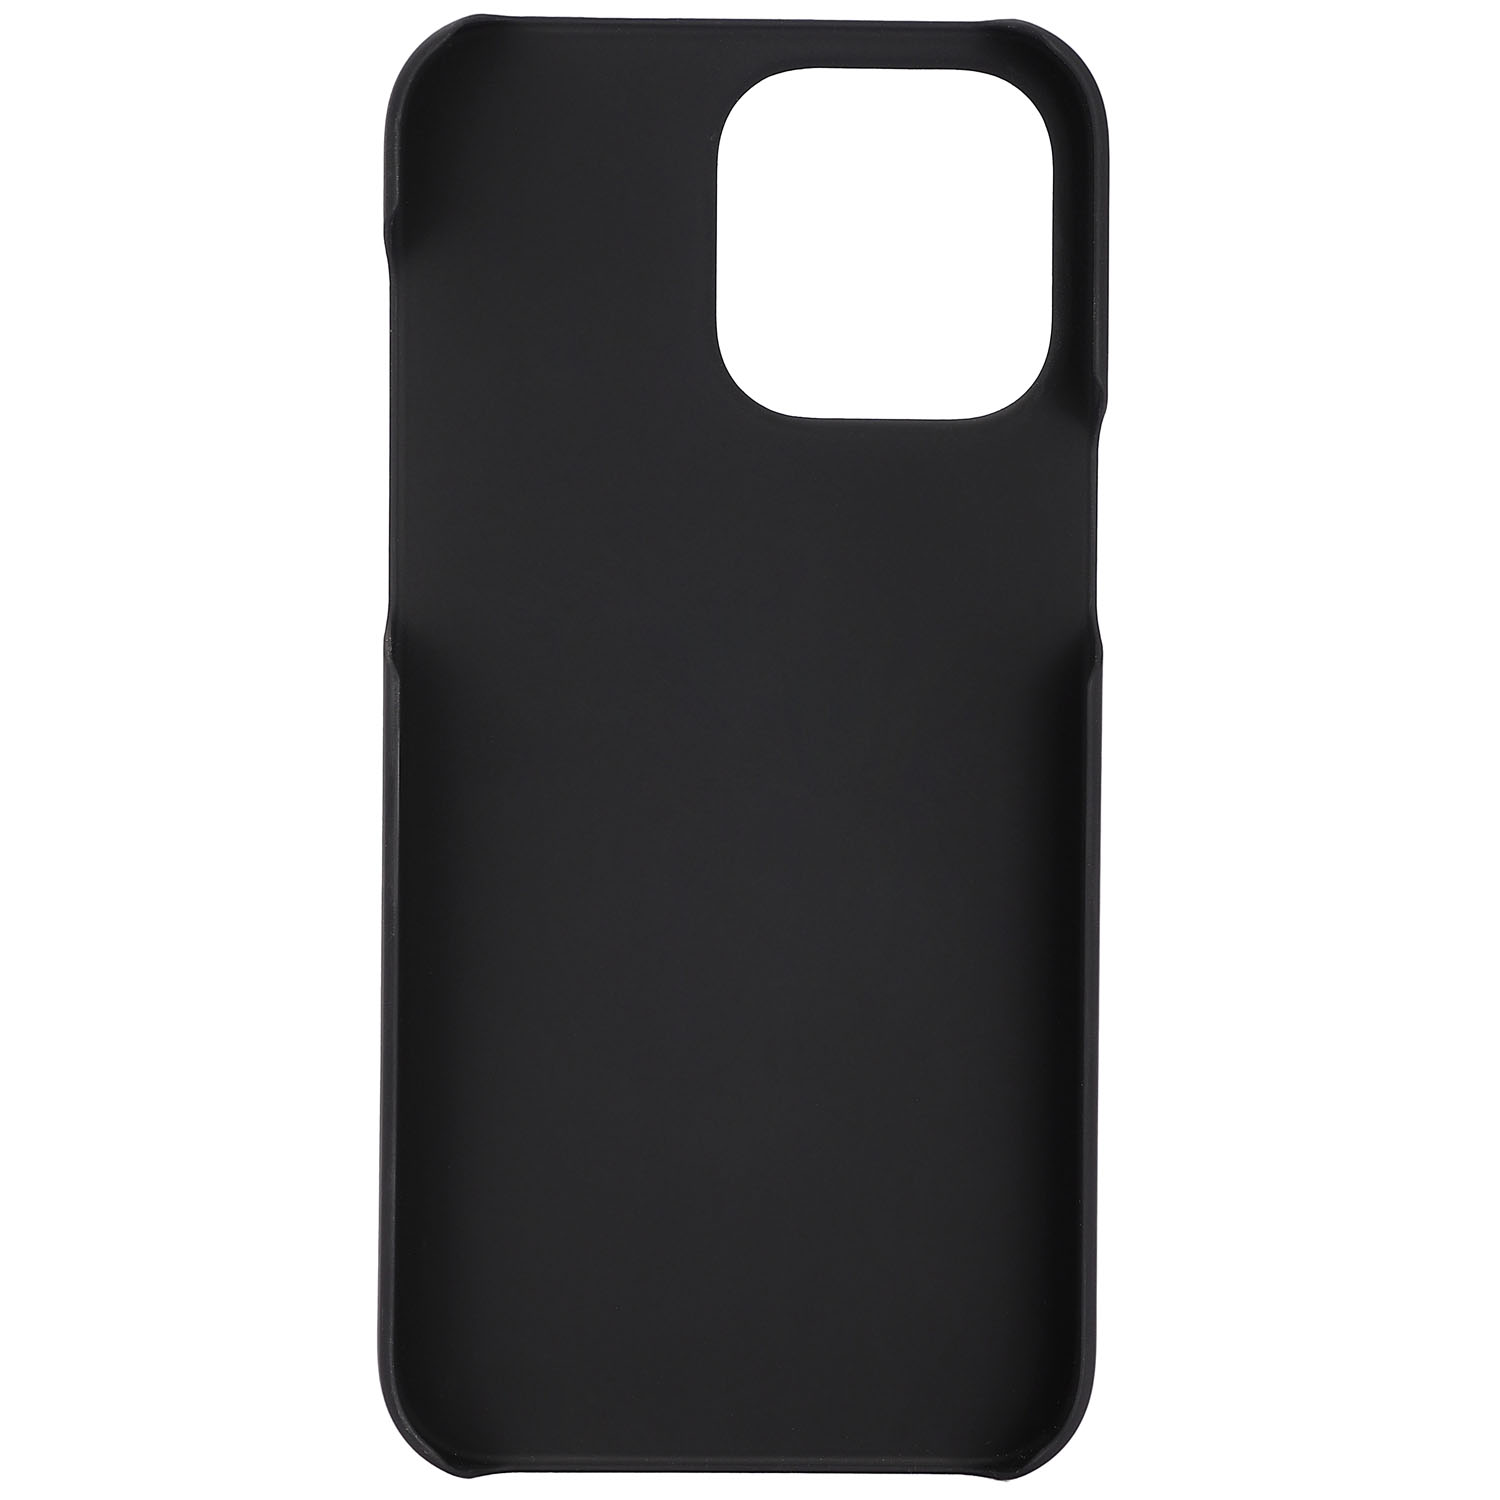 KRUSELL Leder iPhone Pro Schwarz, Max Schwarz 14 Backcover, 14 iPhone Apple, CardCover Max, Pro